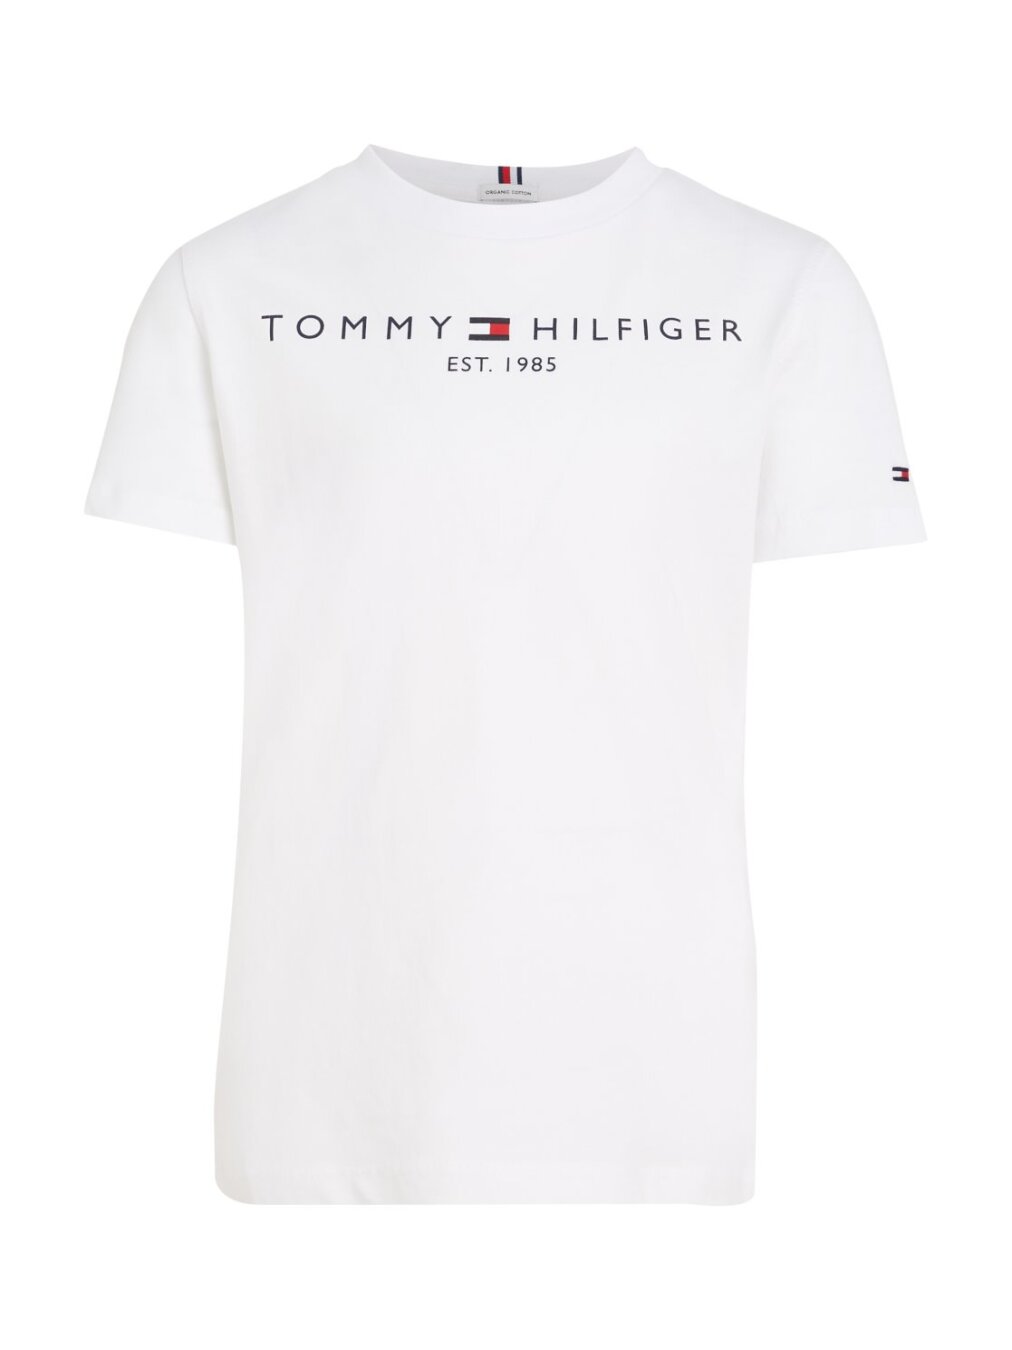 TOMMY BAGELS TEE S/S, 34,90 EUR | T-Shirts